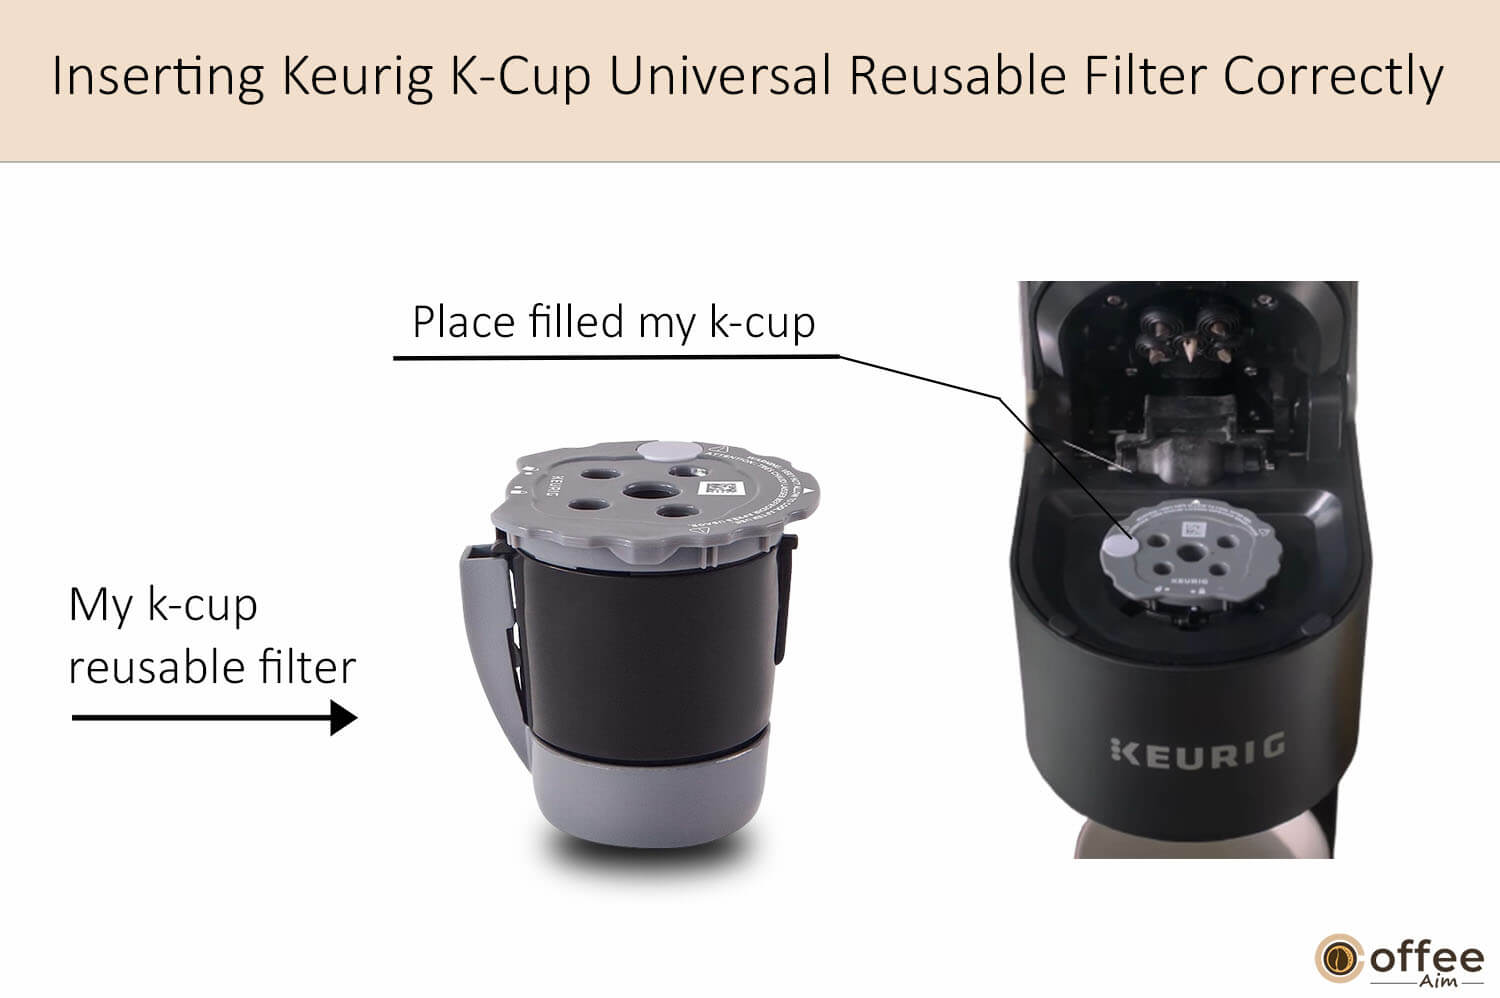 In this picture, I'm illustrating the place filled my k-cup.